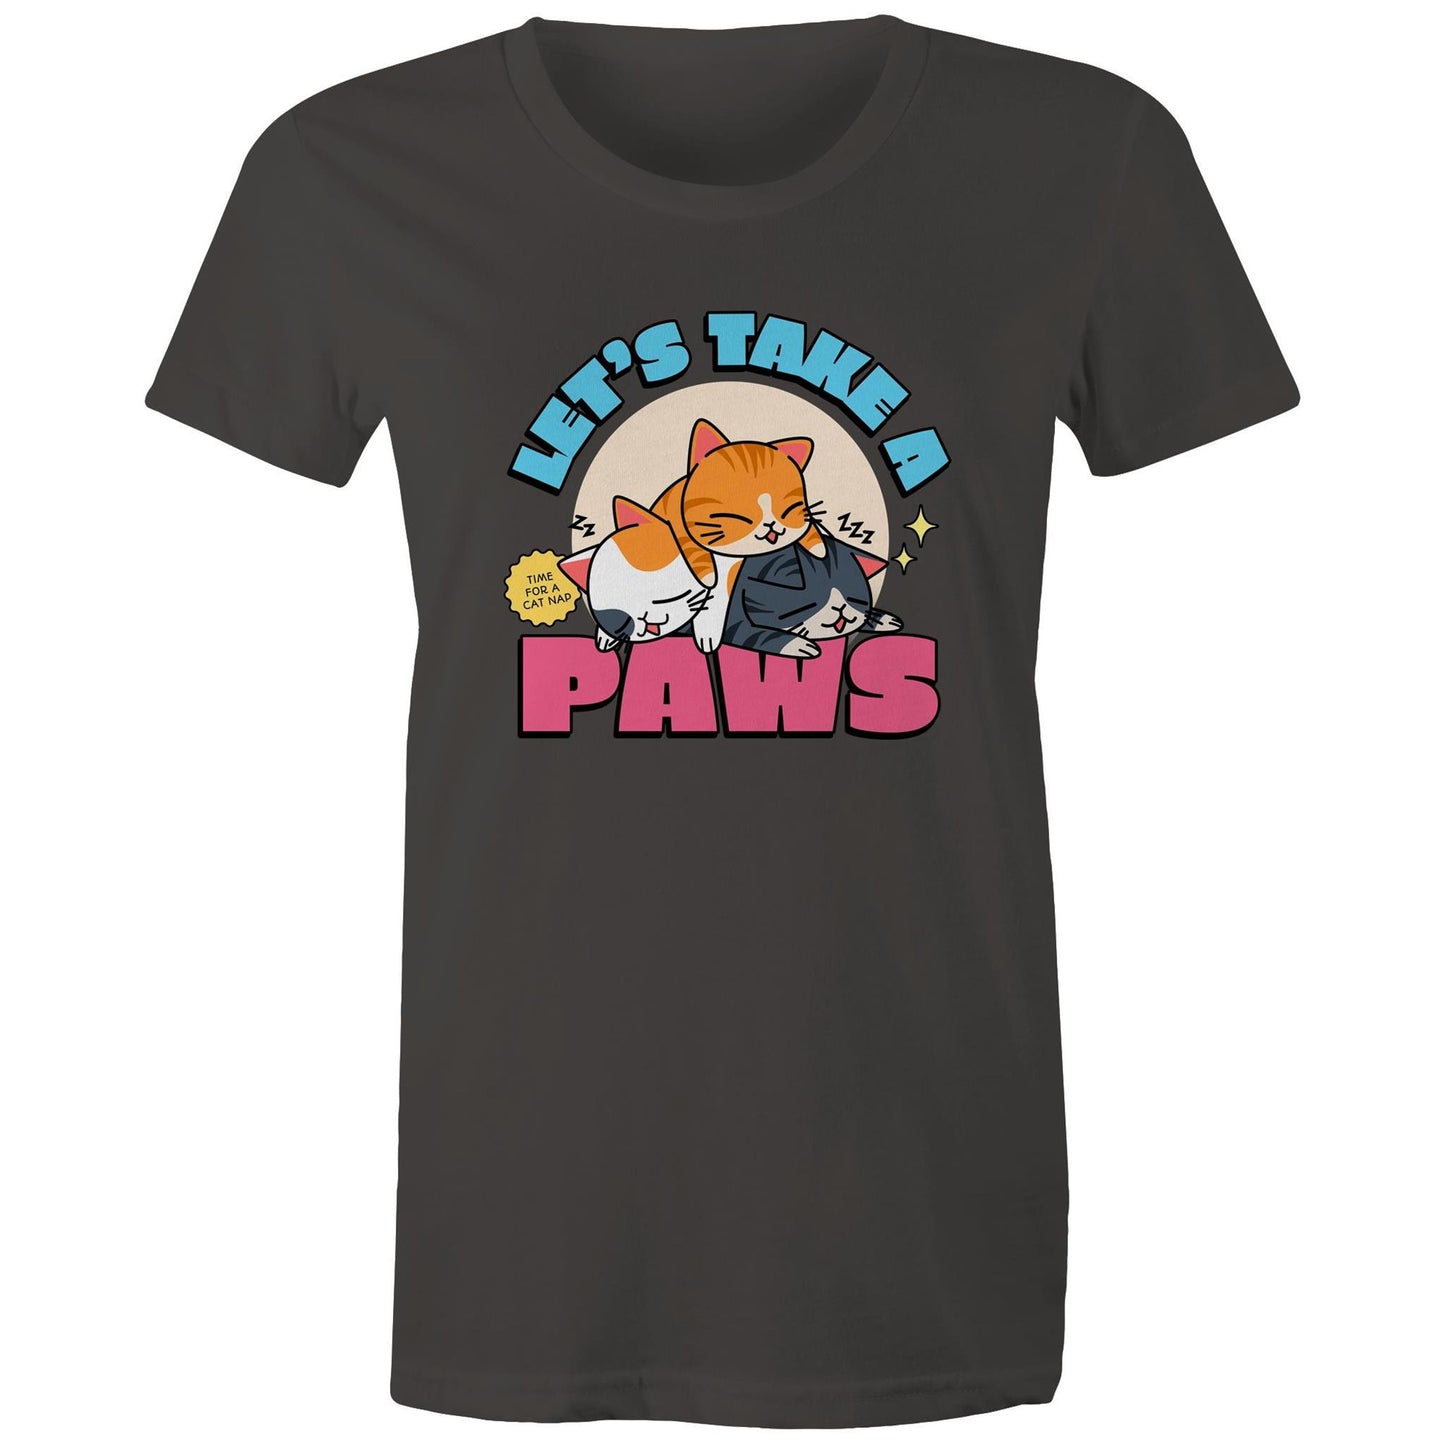 Let's Take A Paws, Time For A Cat Nap - Womens T-shirt Charcoal Womens T-shirt animal